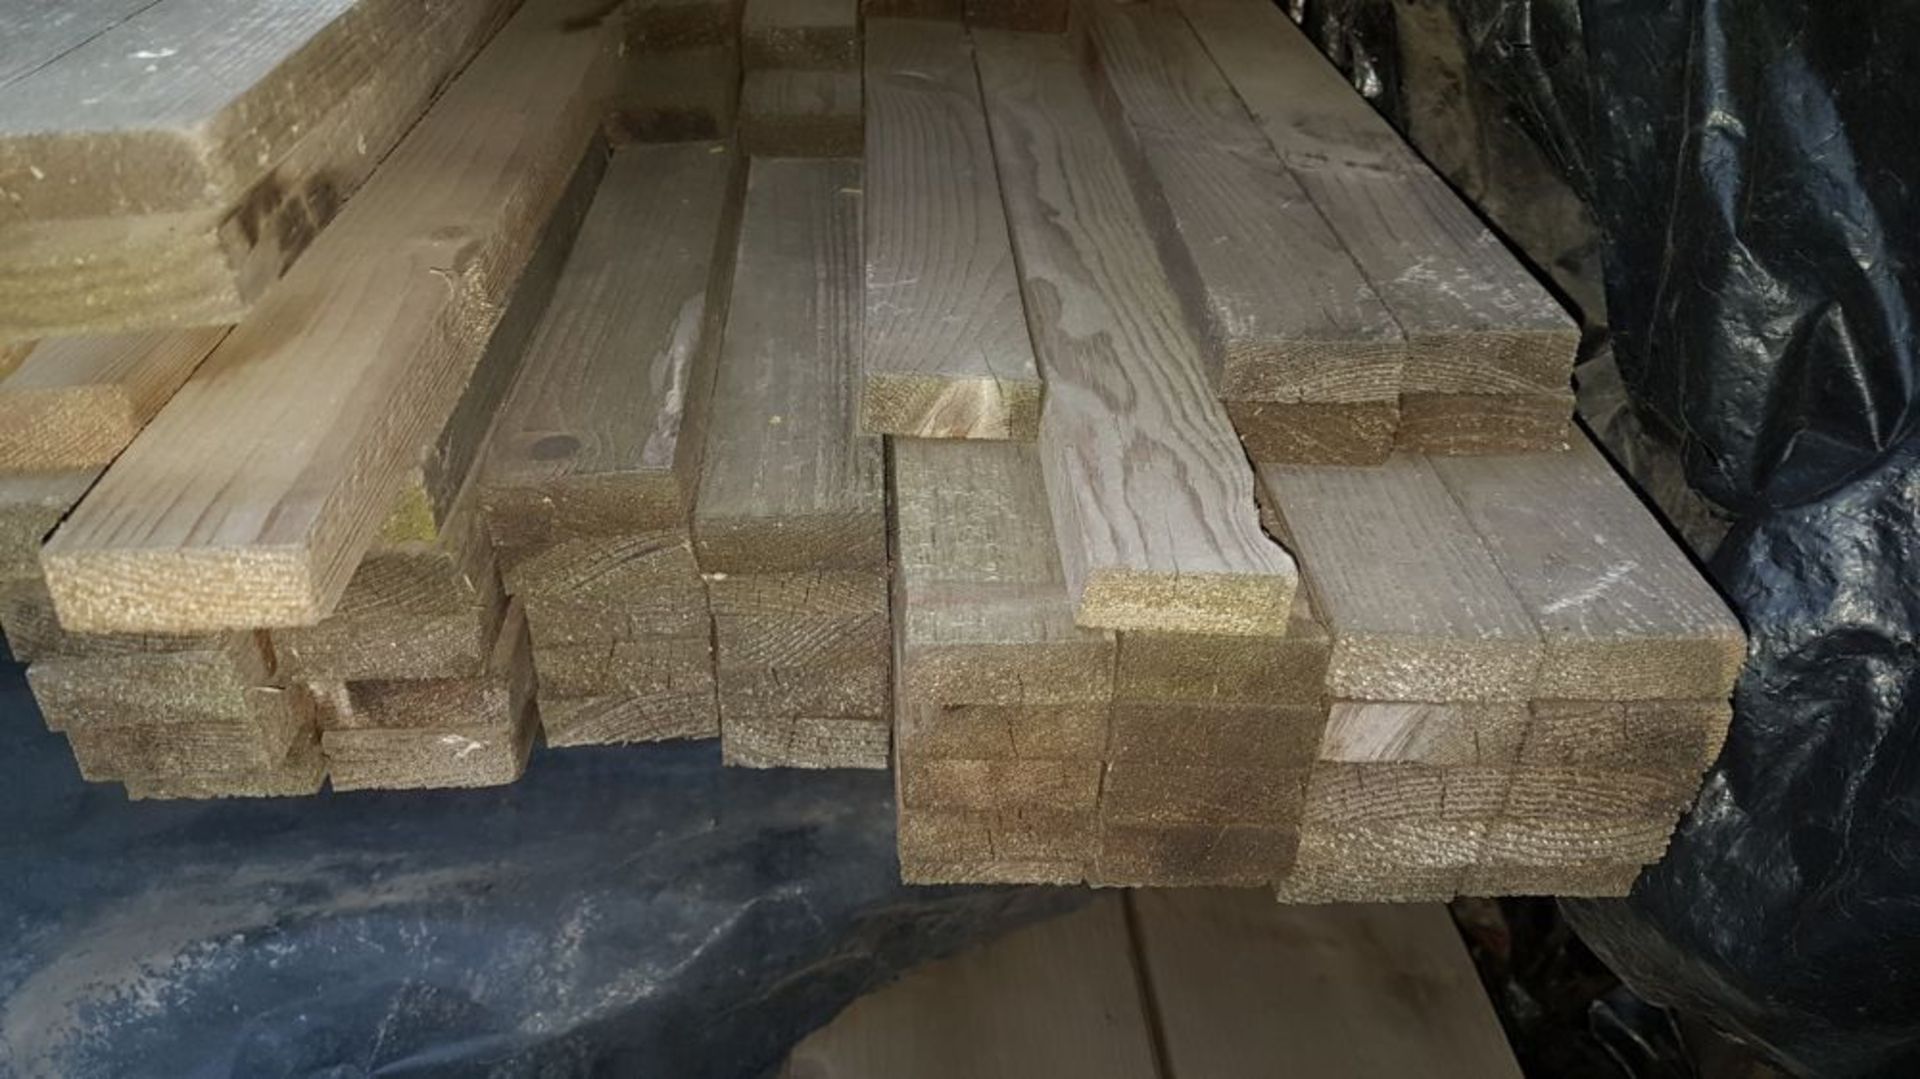 * 22x50 (19x45), planed square edged, 88 pieces @ 4500mm. MX0026. Please note this lot is located at